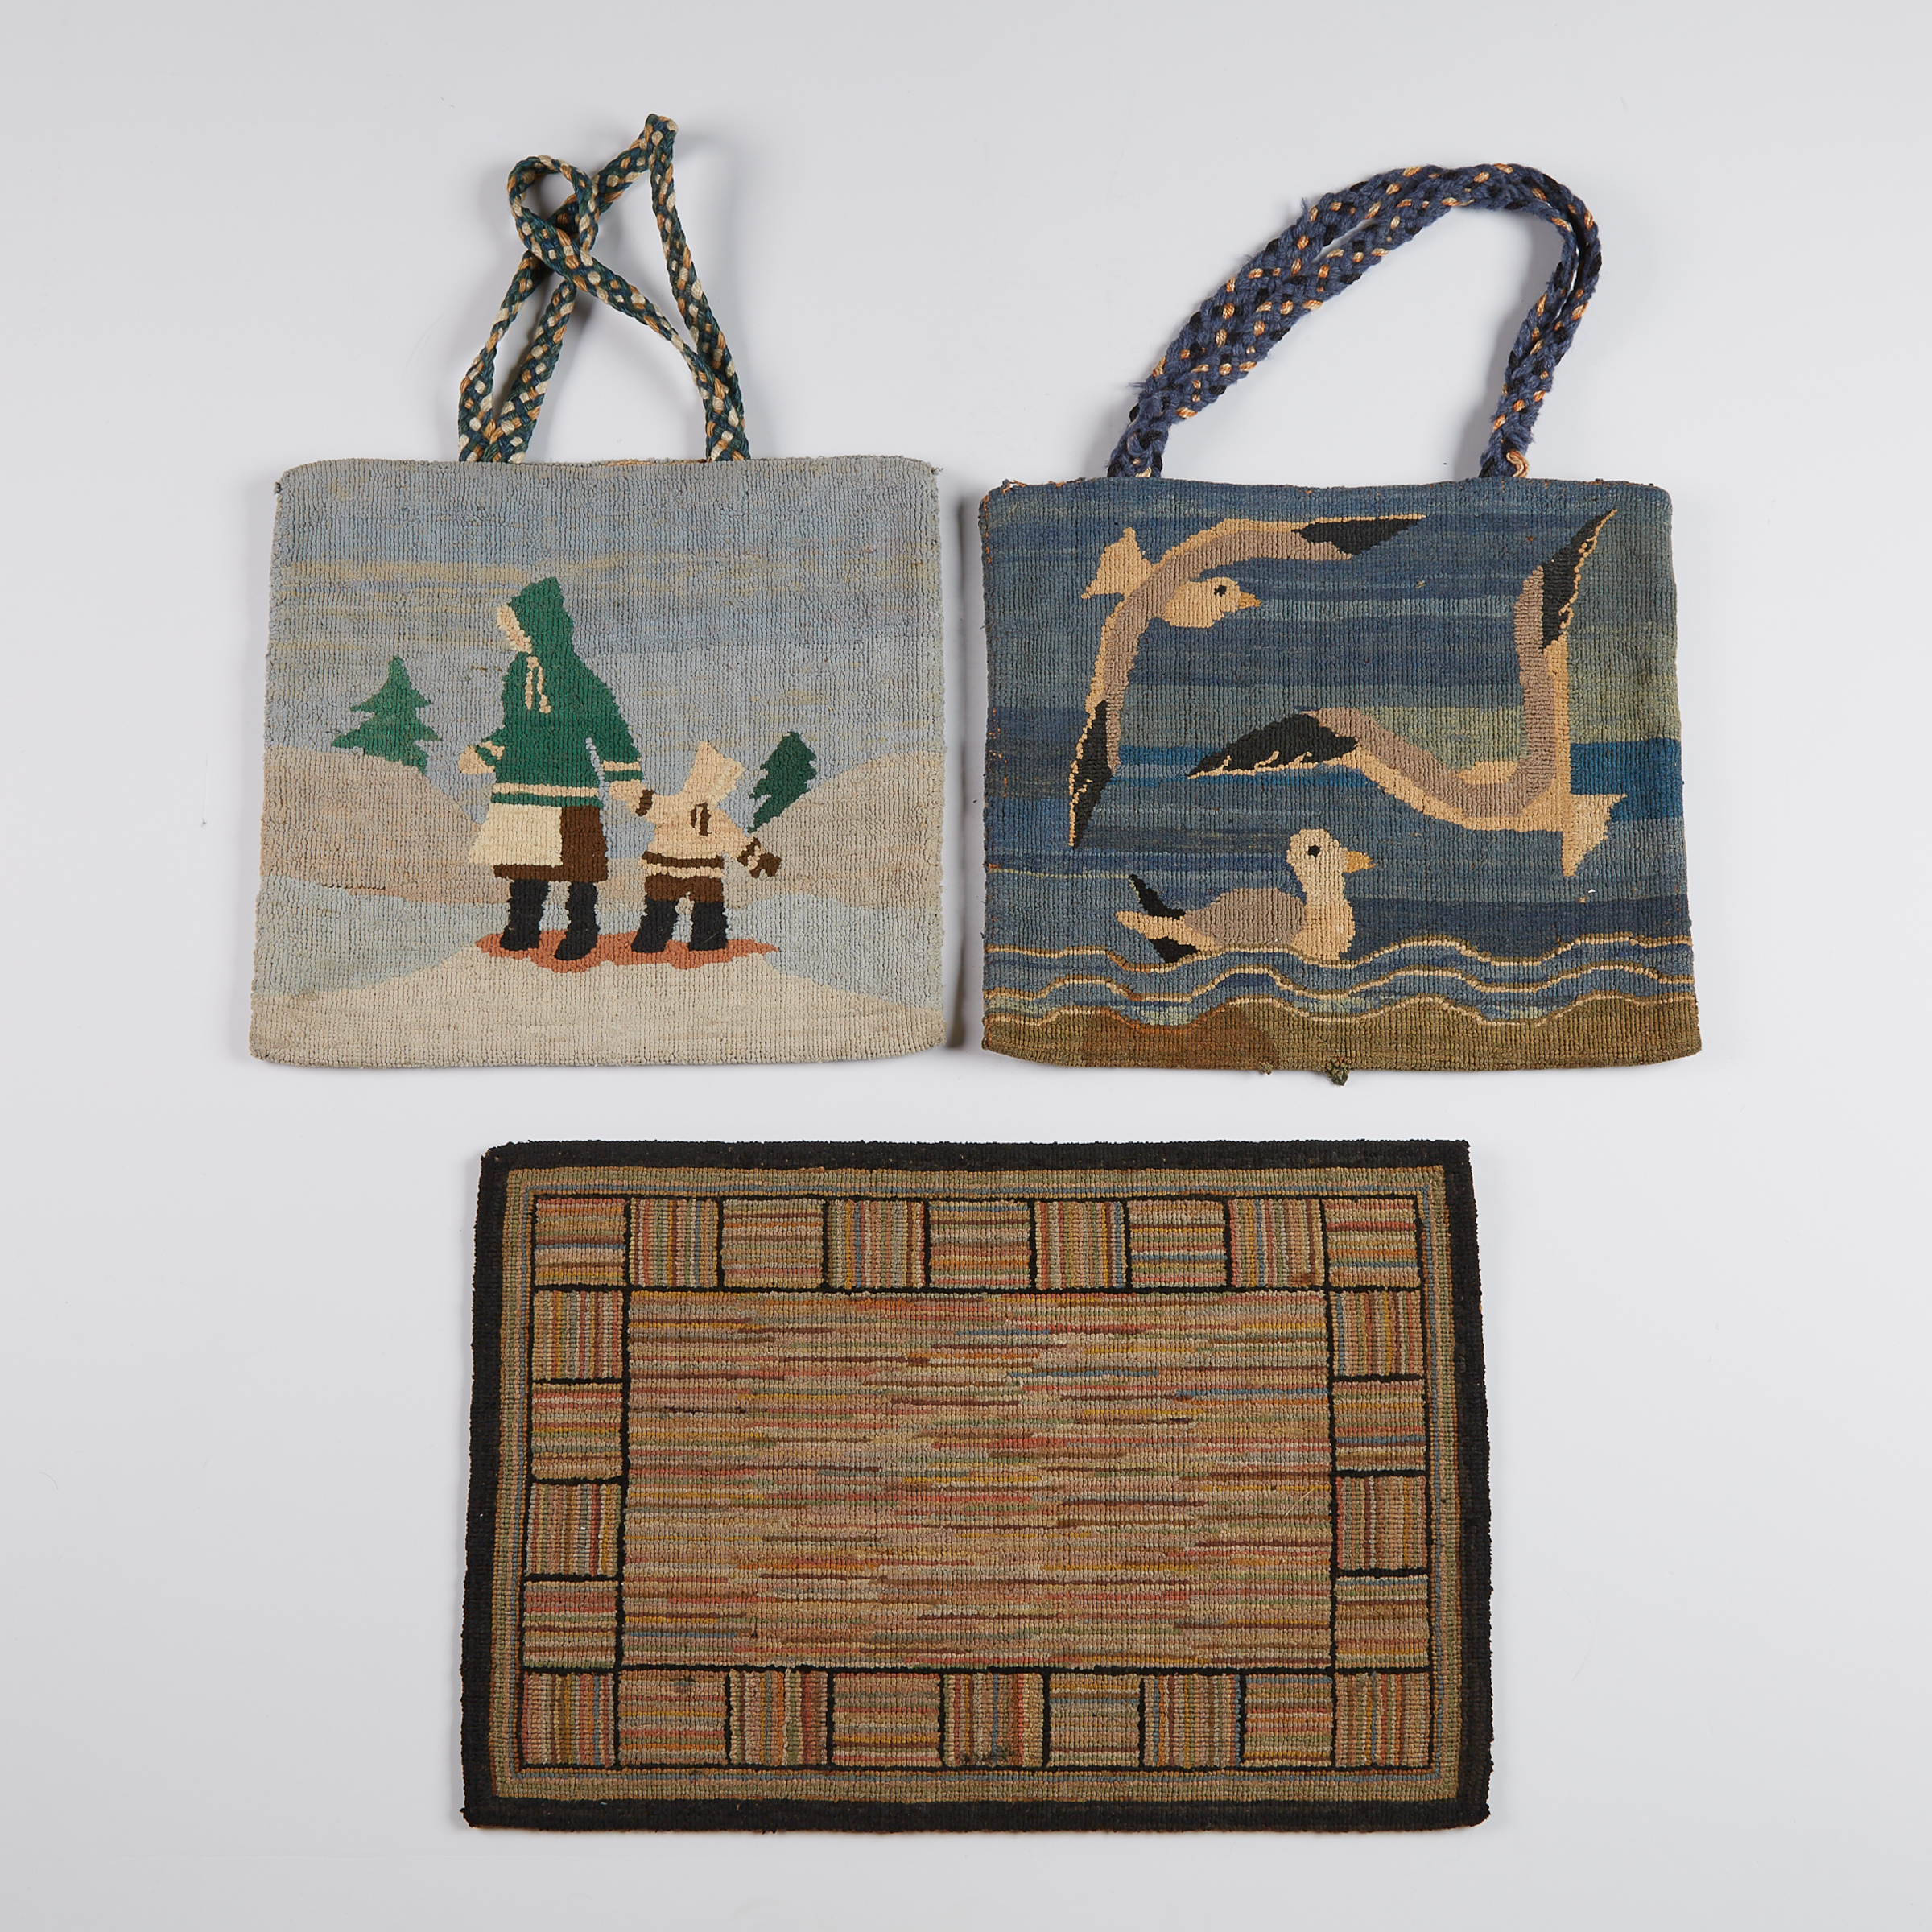 Two Grenfell Labrador Industries Hooked Hand Bags, c.1930 and 1950